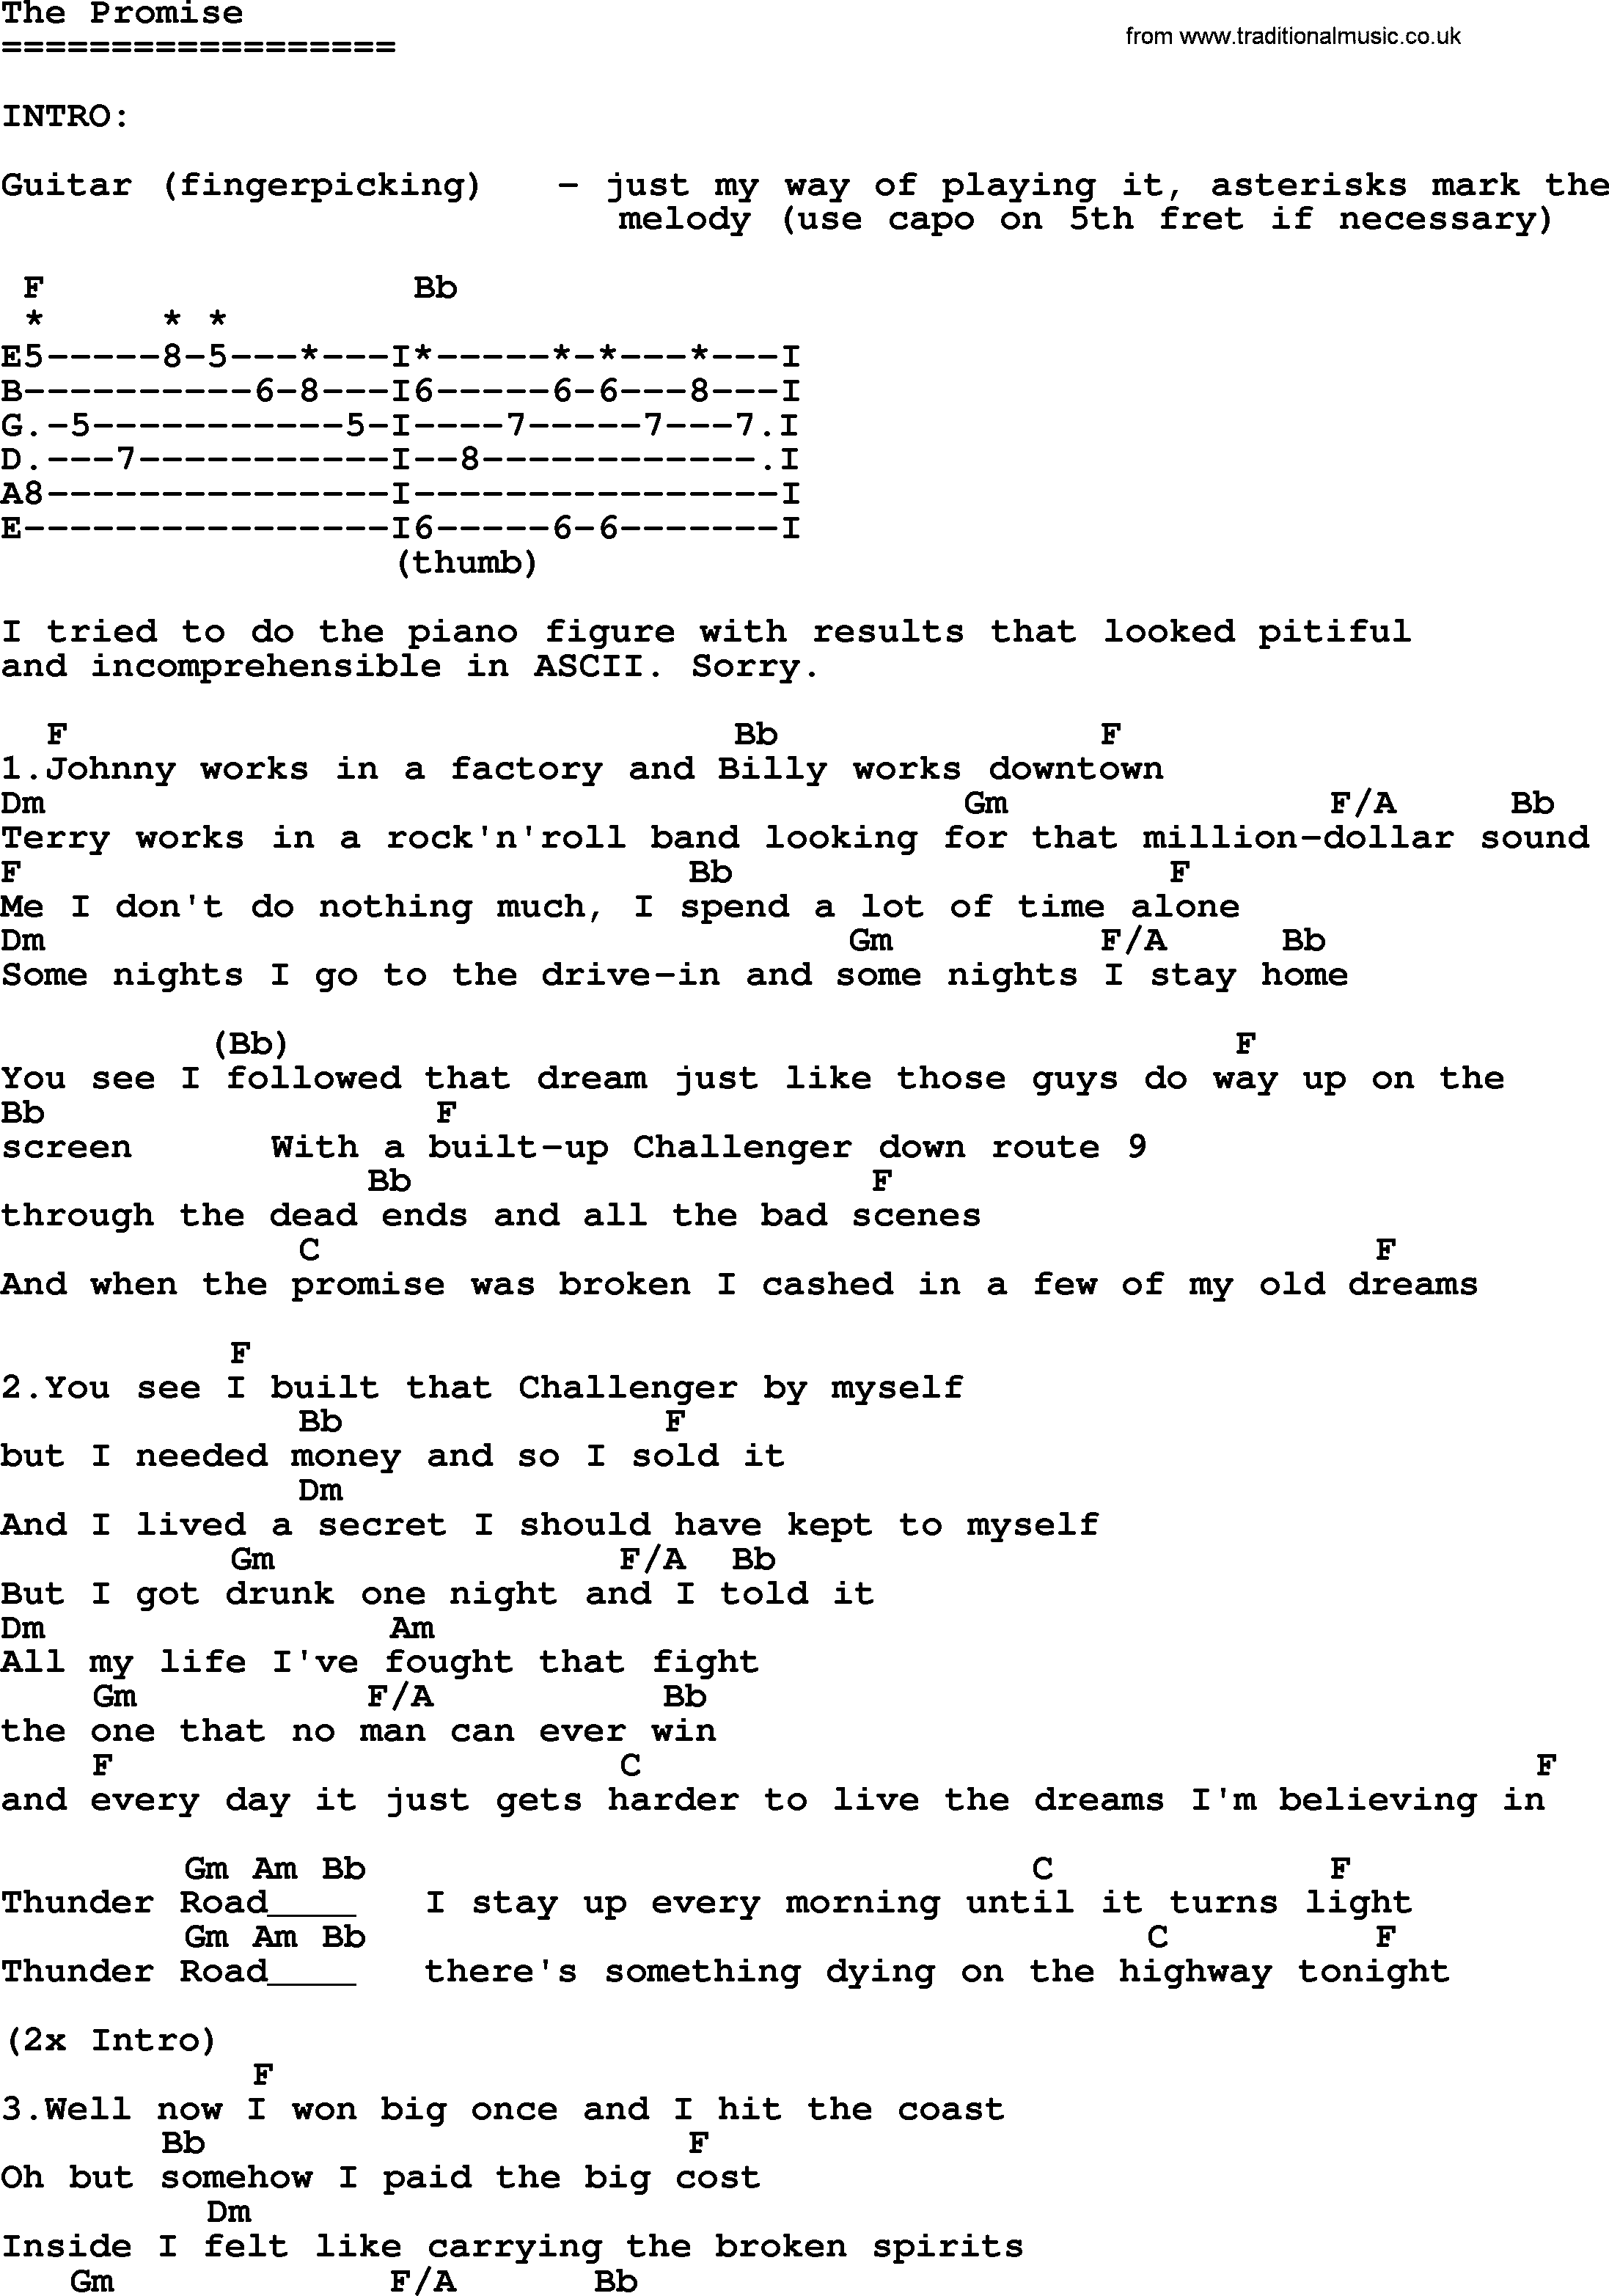 Bruce Springsteen song: The Promise, lyrics and chords